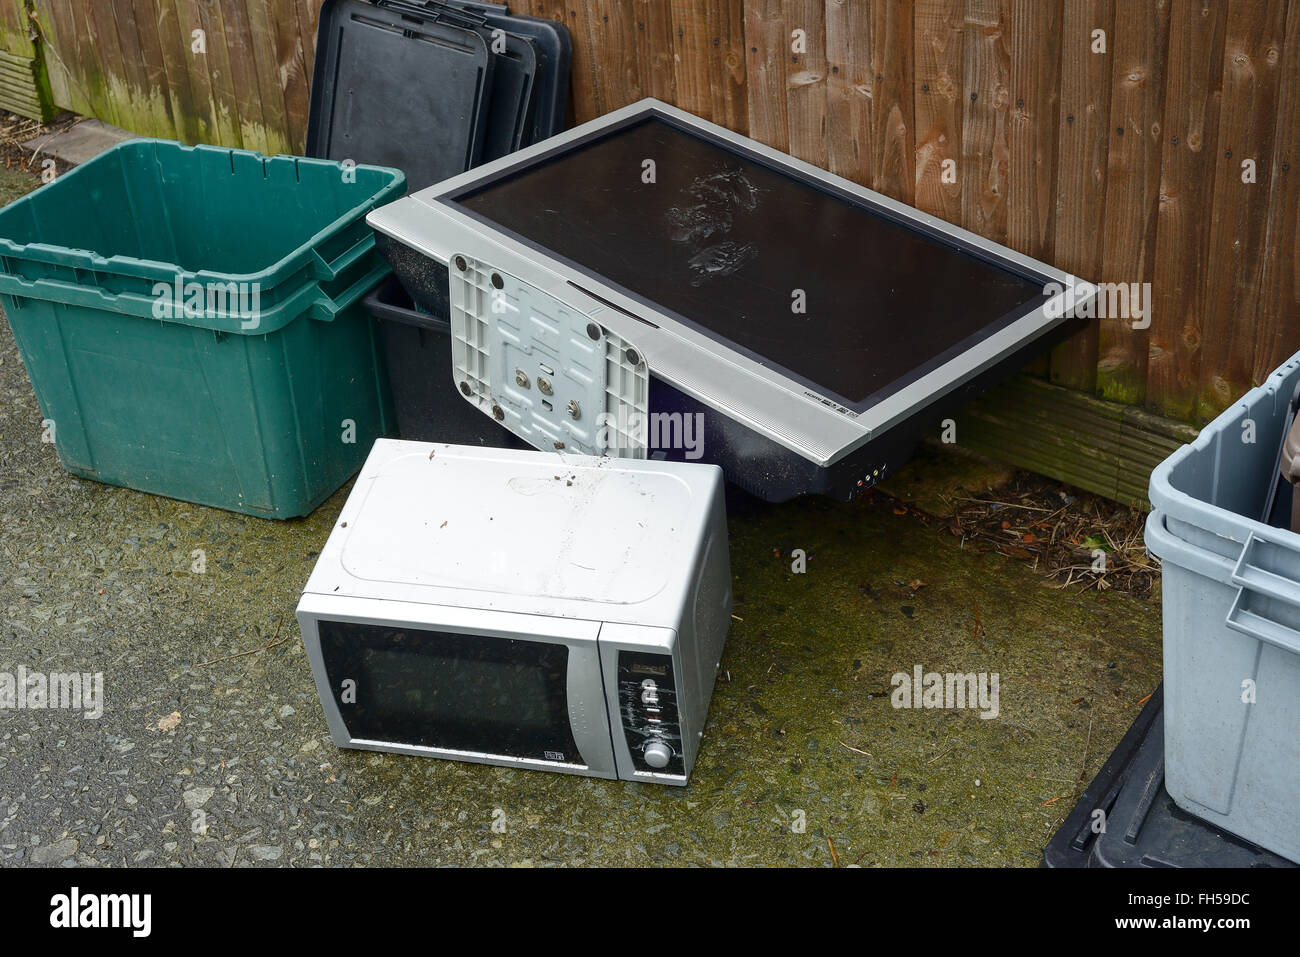 An old TV and microwave oven dumped on a pavement Stock Photo